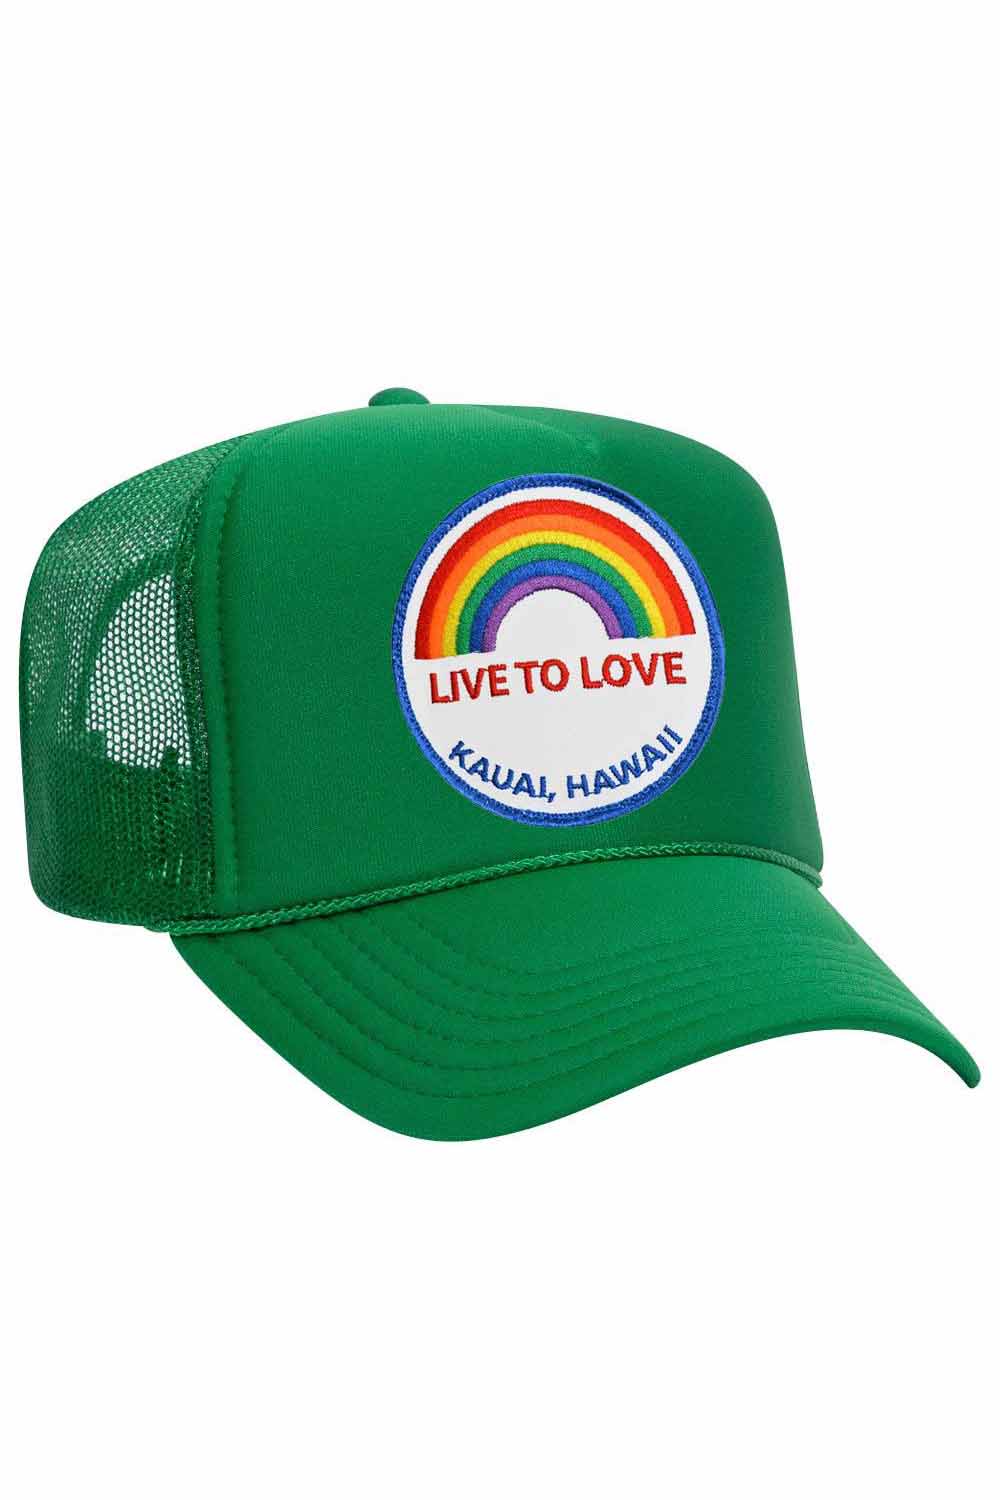 LIVE TO LOVE VINTAGE TRUCKER HAT HATS Aviator Nation KELLY GREEN 